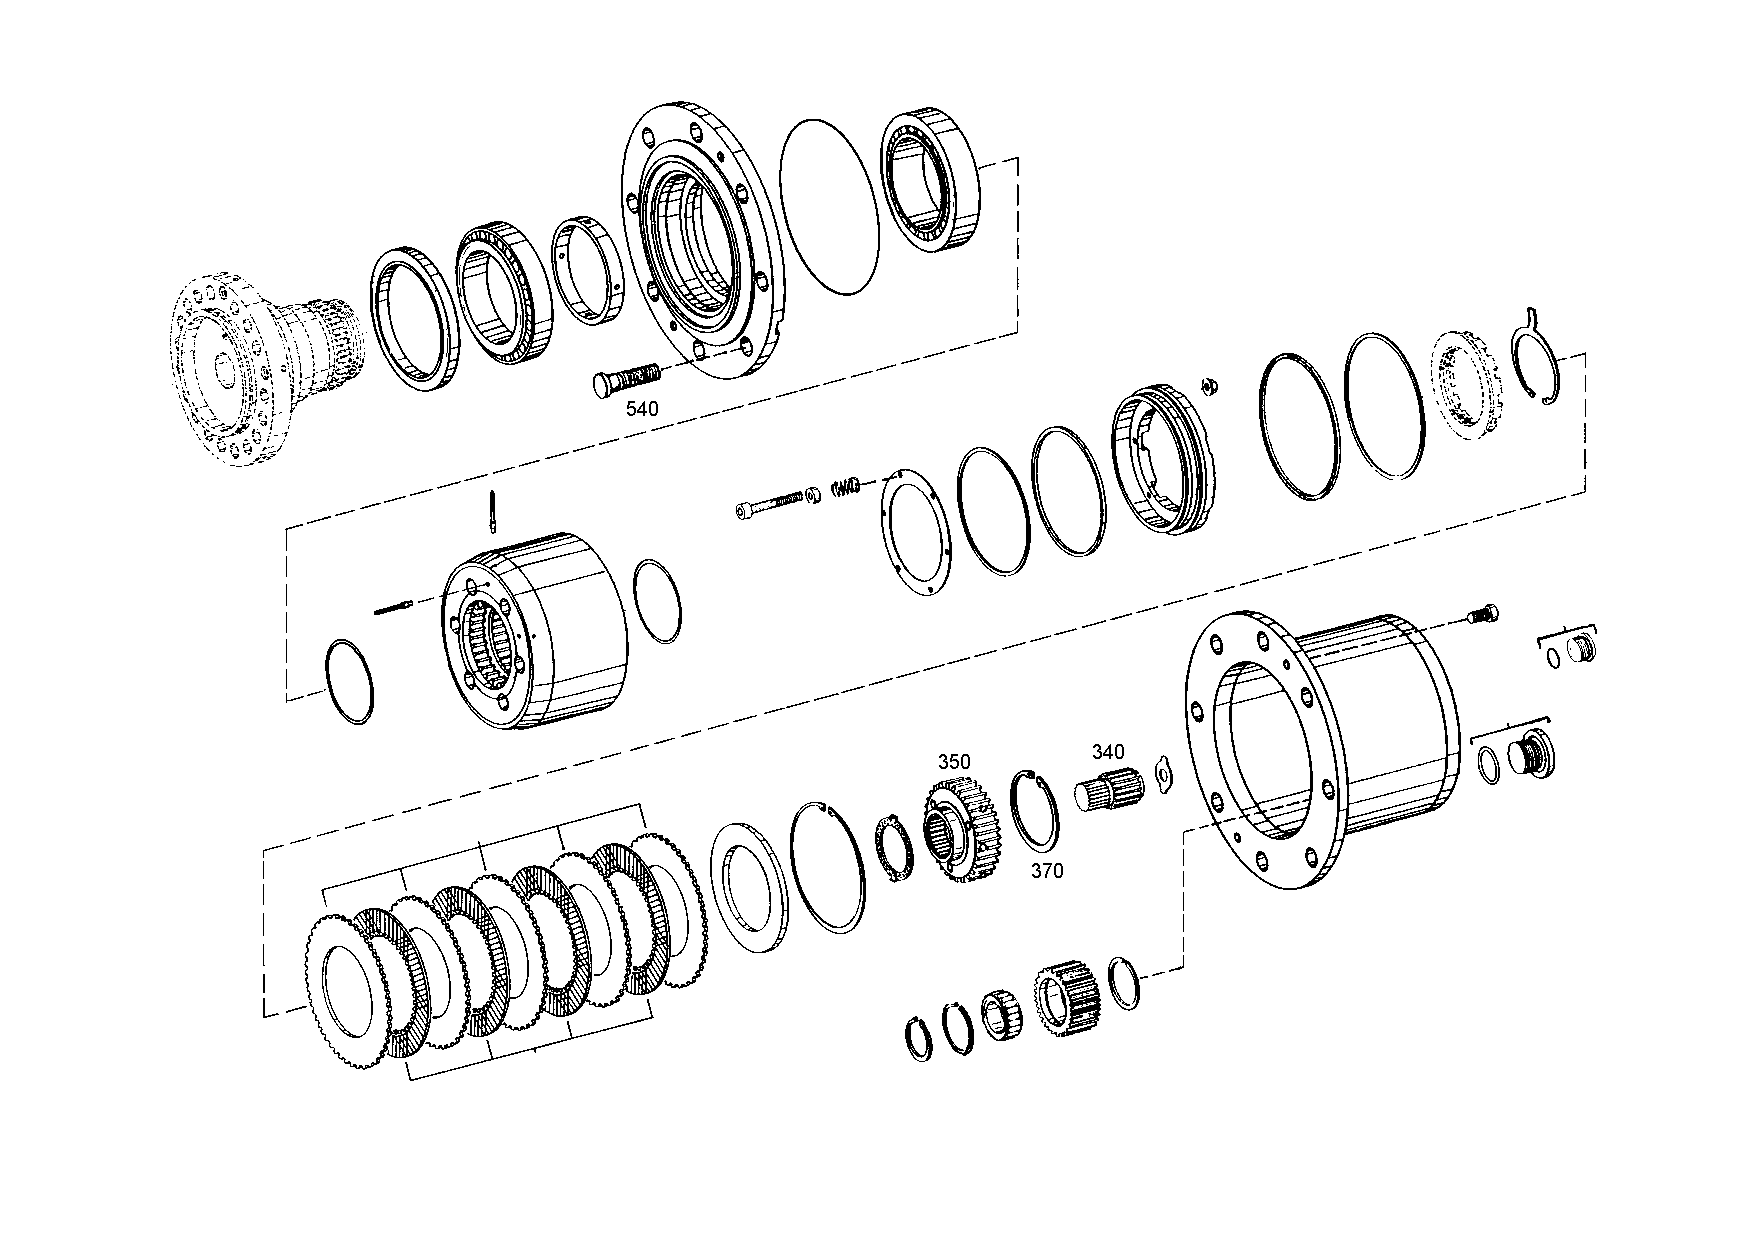 drawing for BOMAG H-1000002004 - SUN GEAR (figure 4)